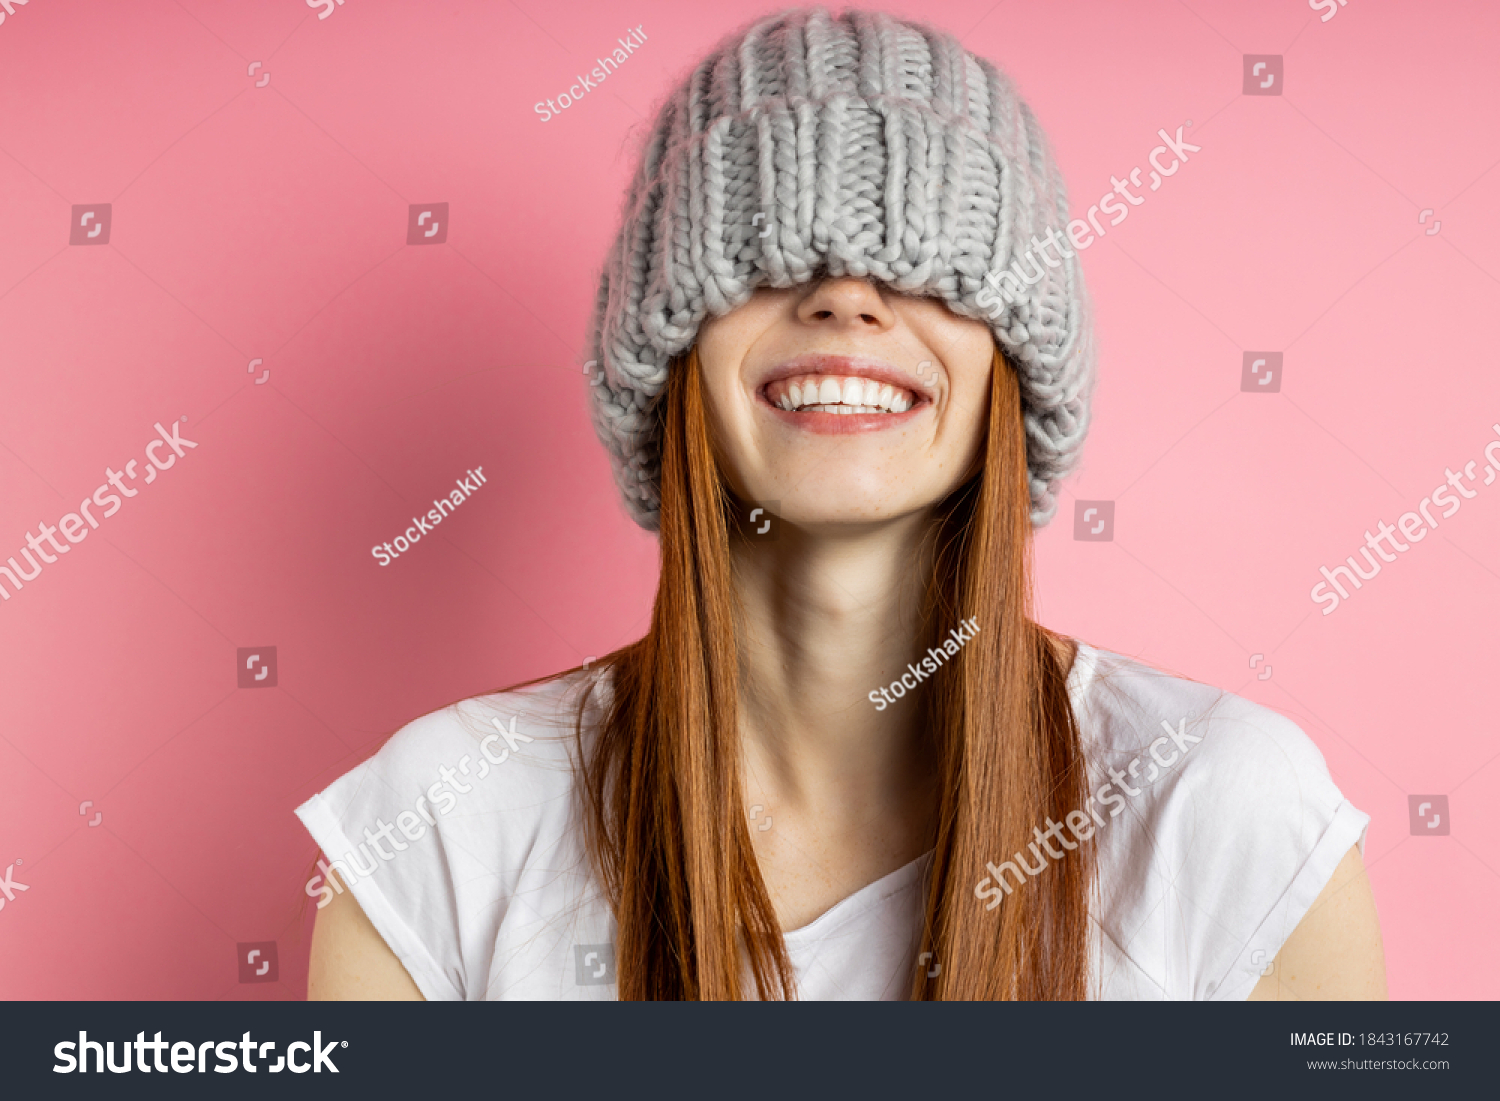 Close up portrait of cheerful happy girl with red long hair having fun, covering eyes with big loop knitted hat, smiling broadly with perfect white teeth isolated over pink background. #1843167742